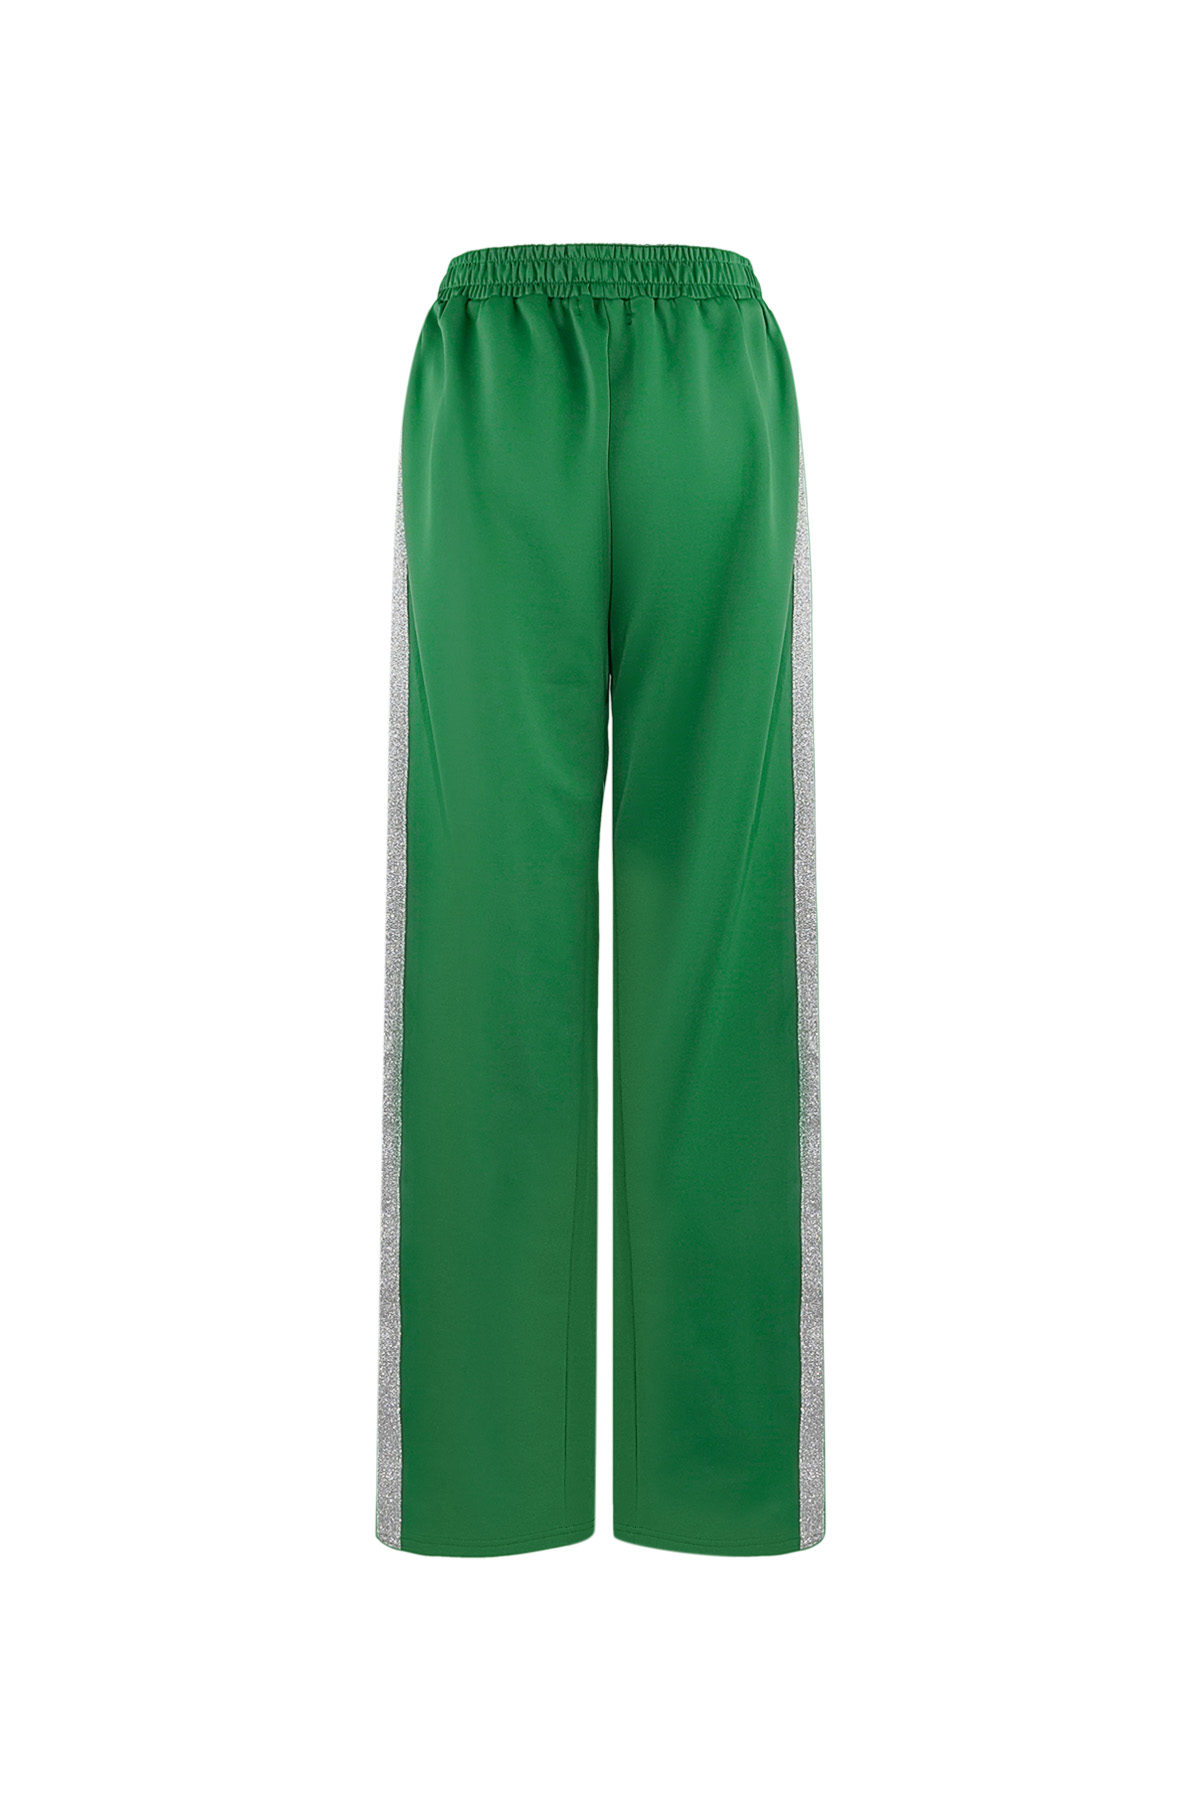 Striped must have pants - green S h5 Picture12